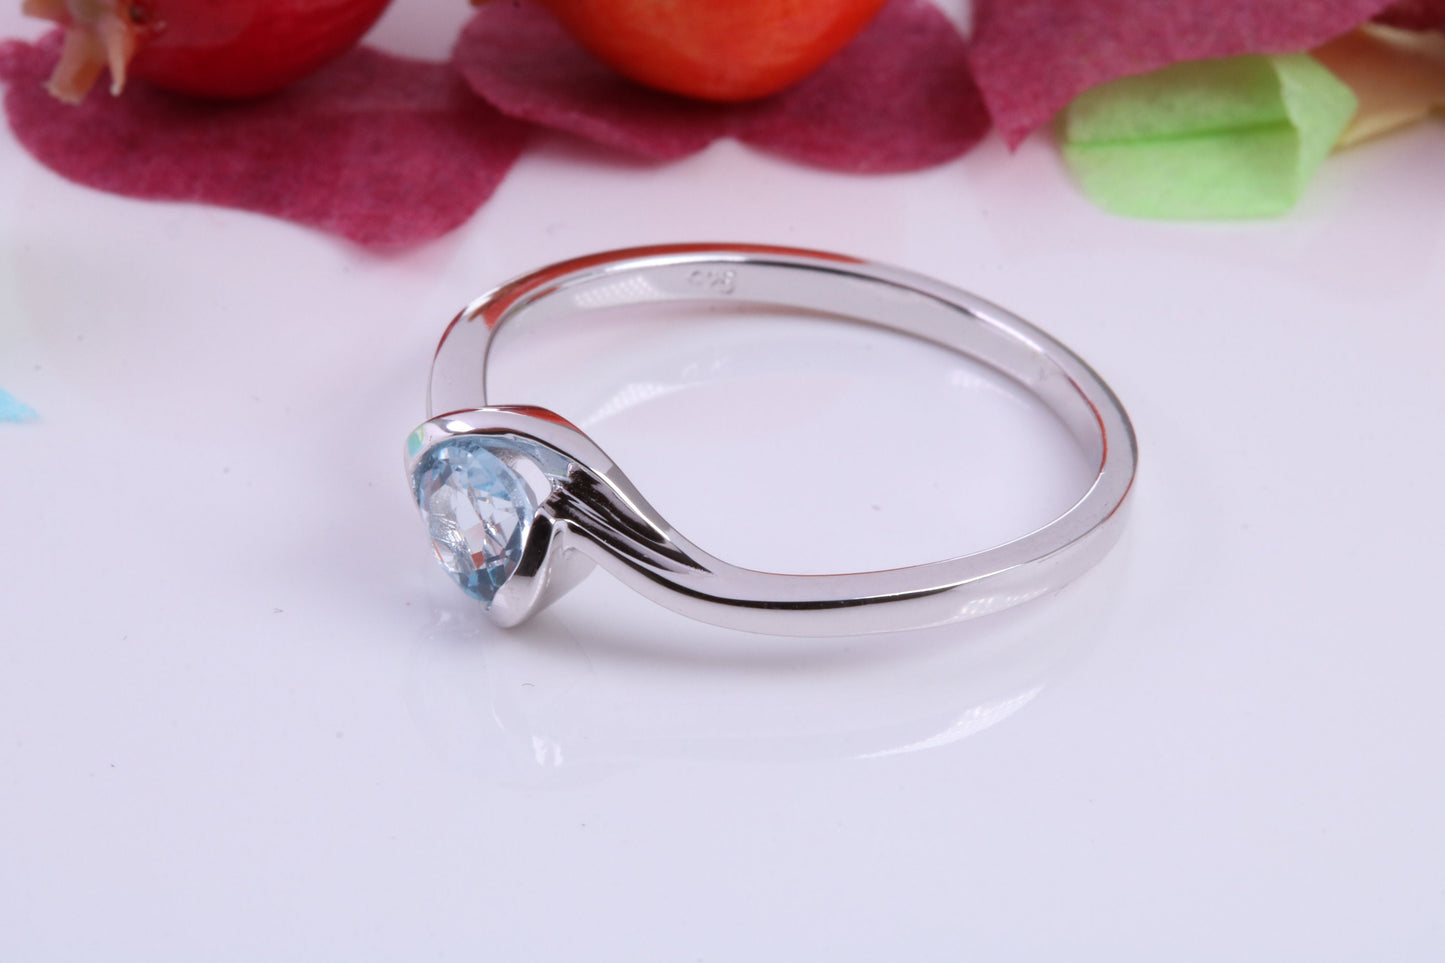 Natural Round cut Blue Topaz set Sterling Silver Ring, Very Smooth Setting, November Birthstone